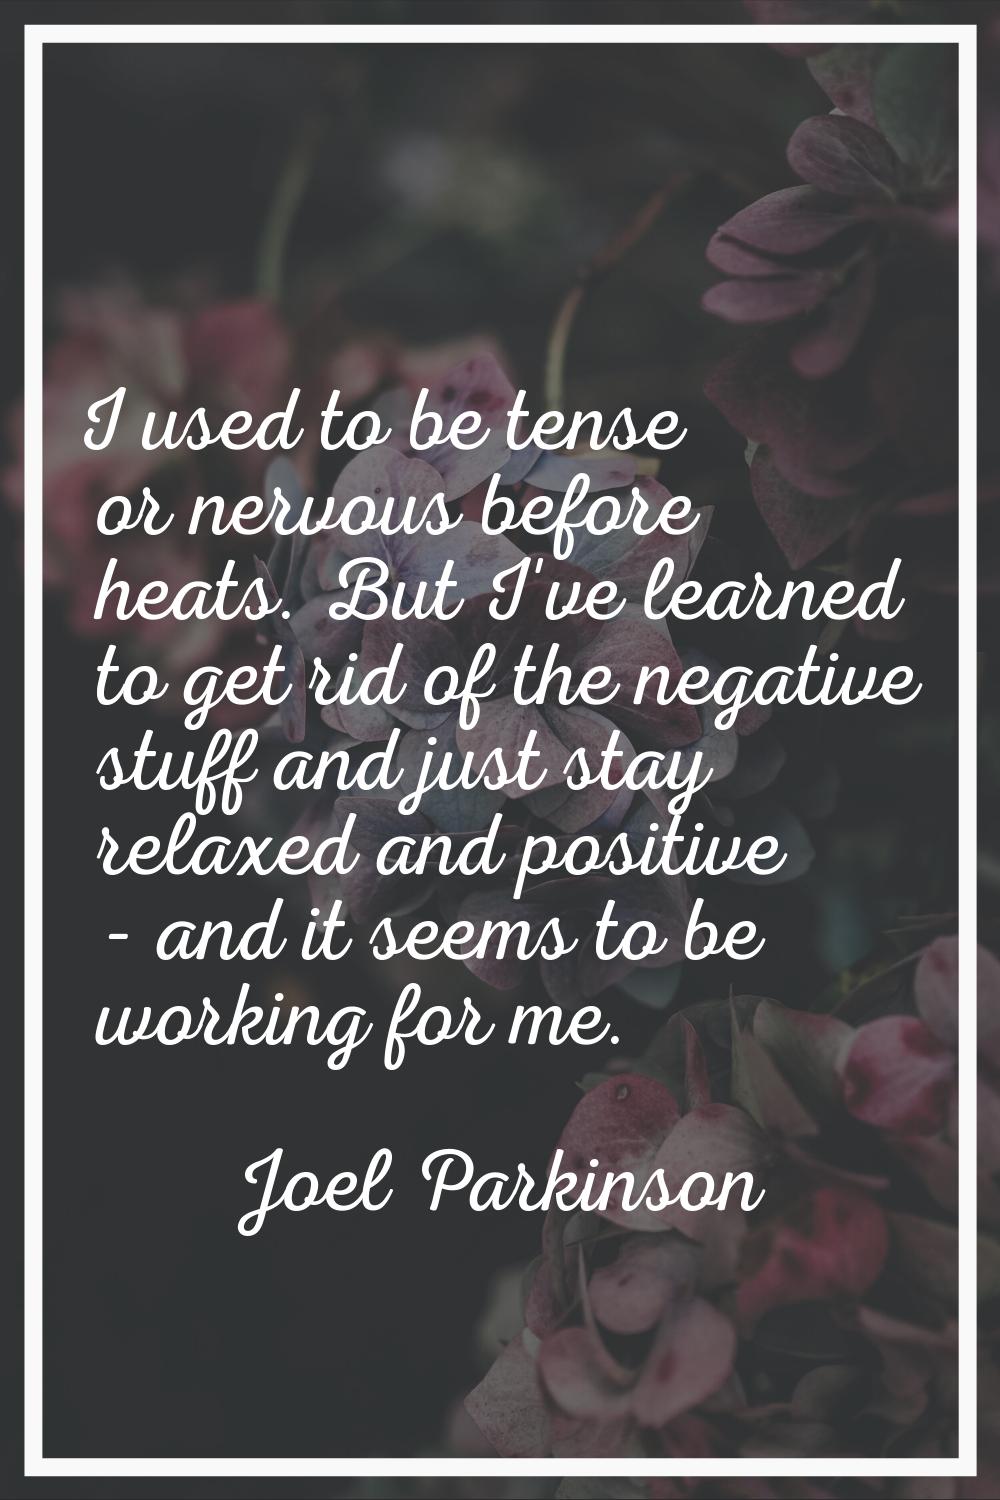 I used to be tense or nervous before heats. But I've learned to get rid of the negative stuff and j